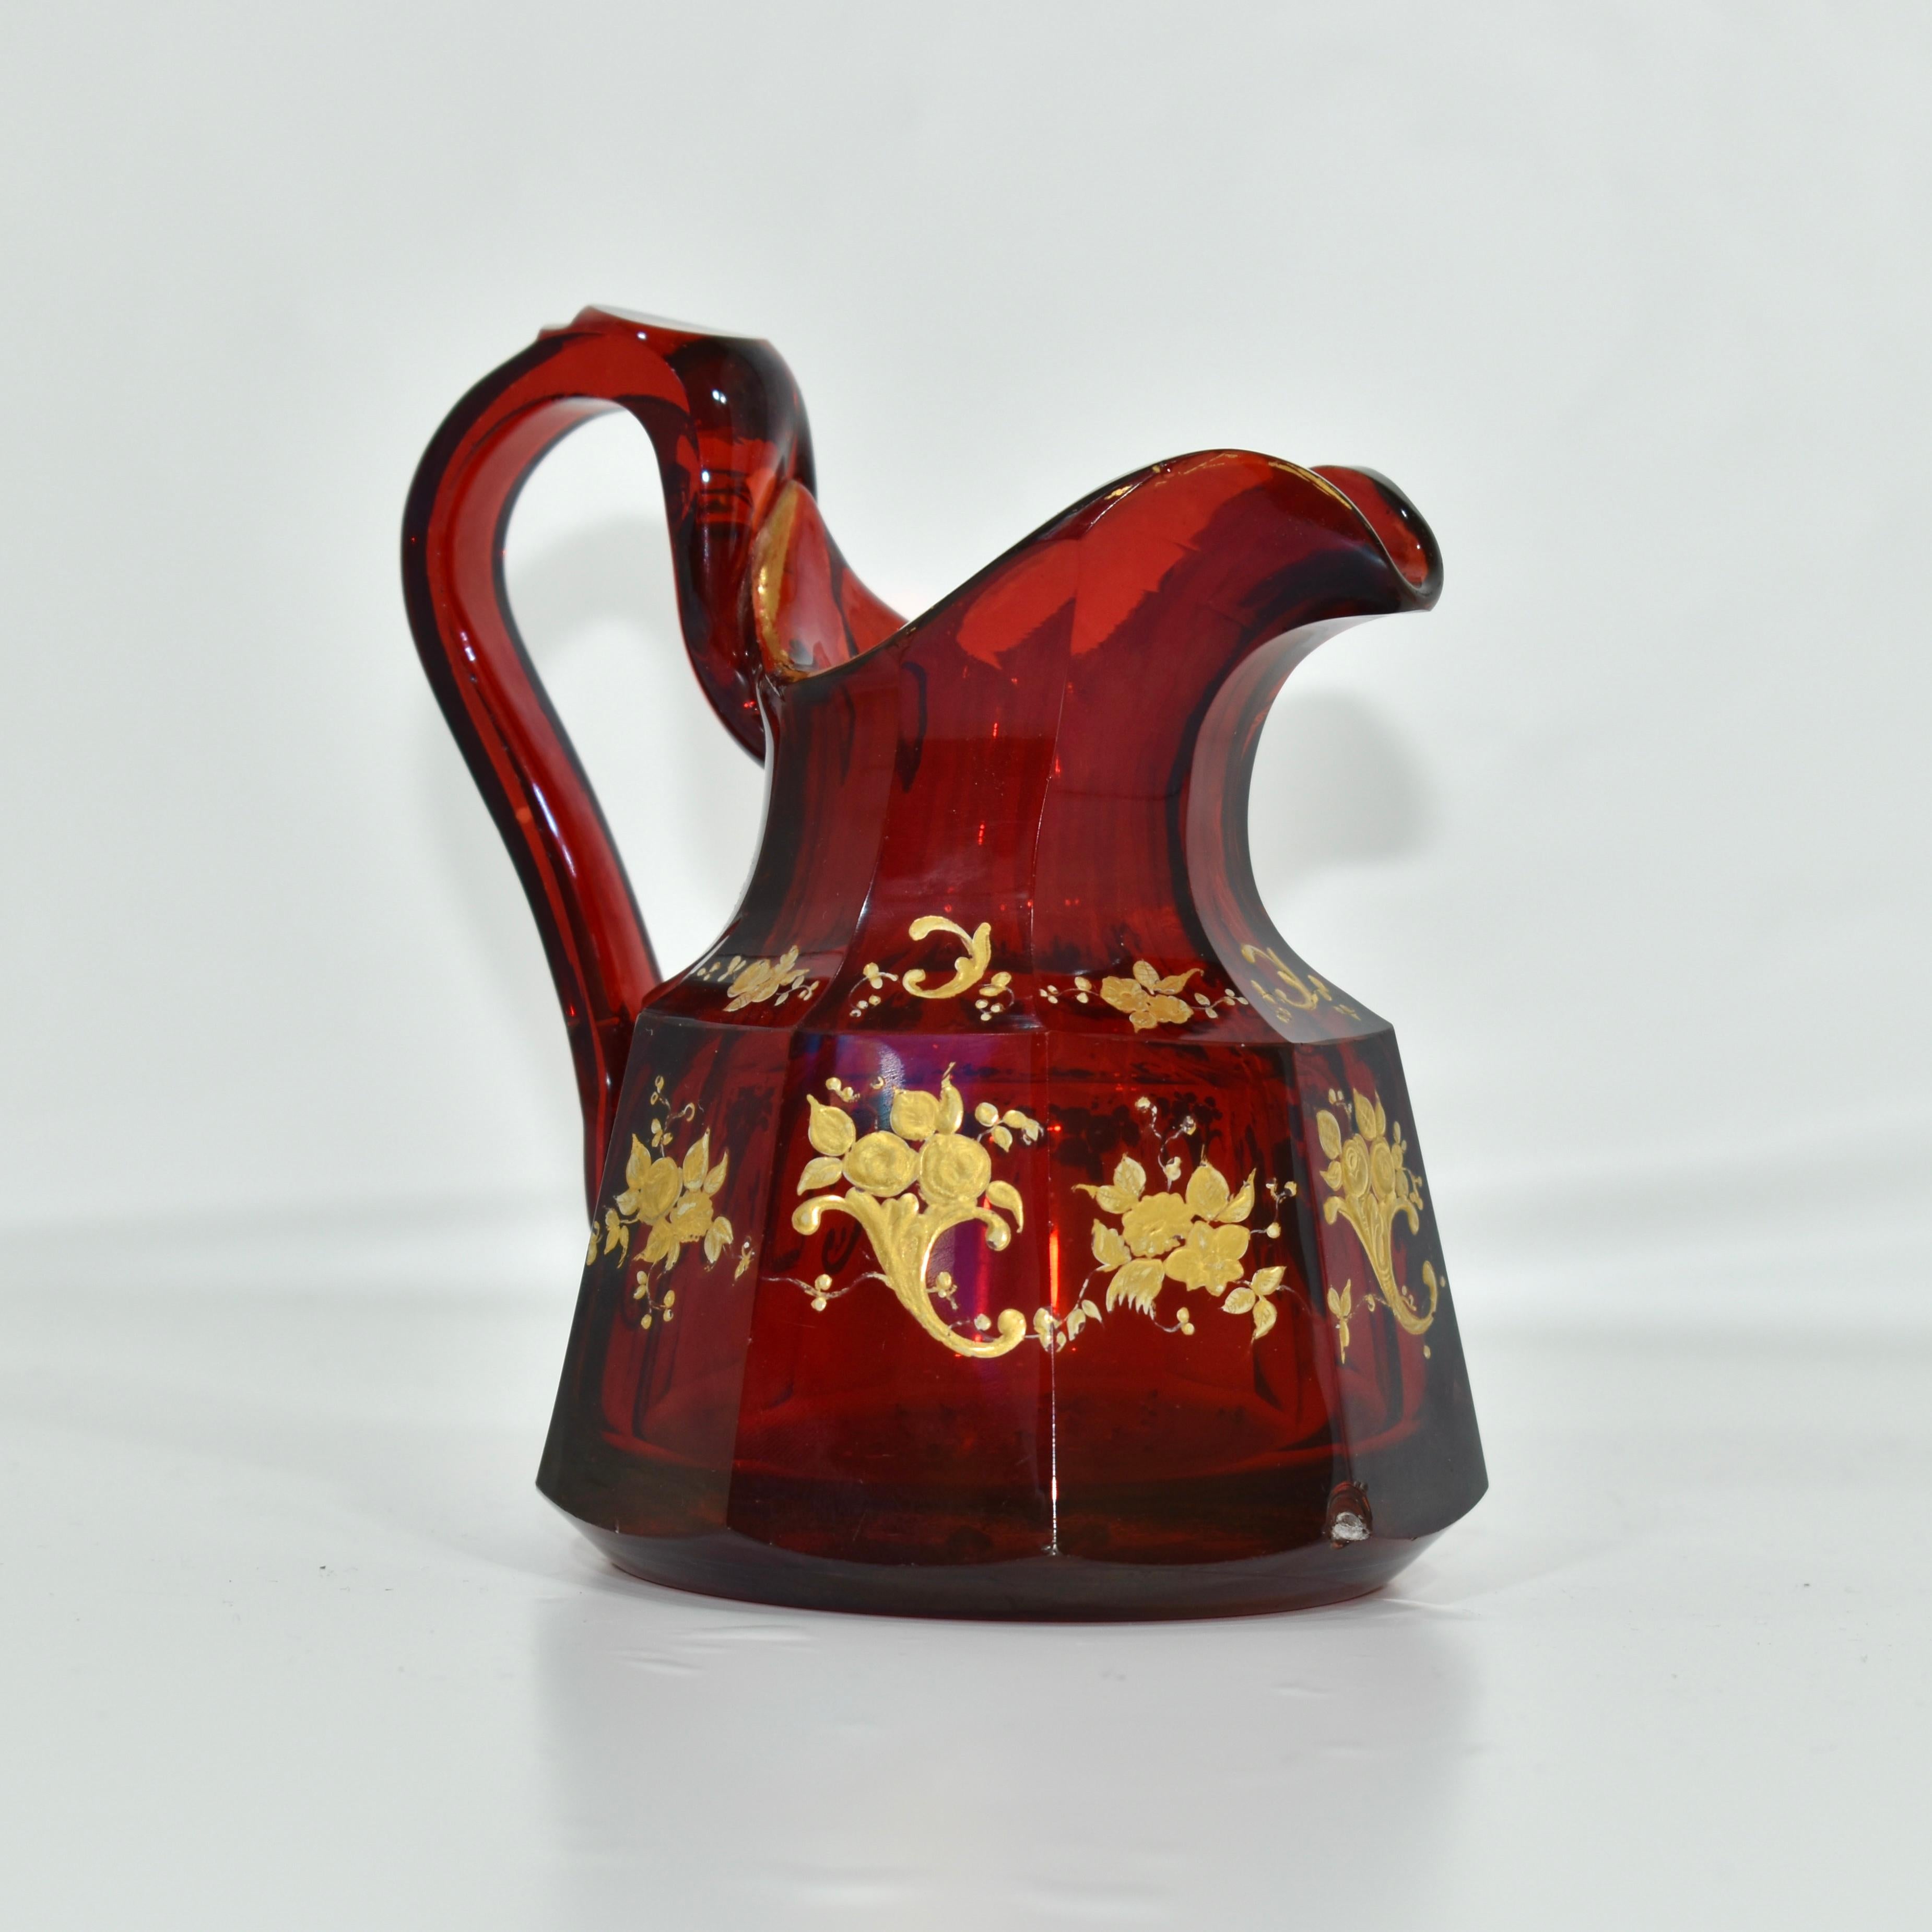 Antique glass jug in ruby red crystal glass
impressive quality, color and substance
Hand-painted with gilded enamel decoration featuring scrolls and flowers, in addition to gilding highlights.